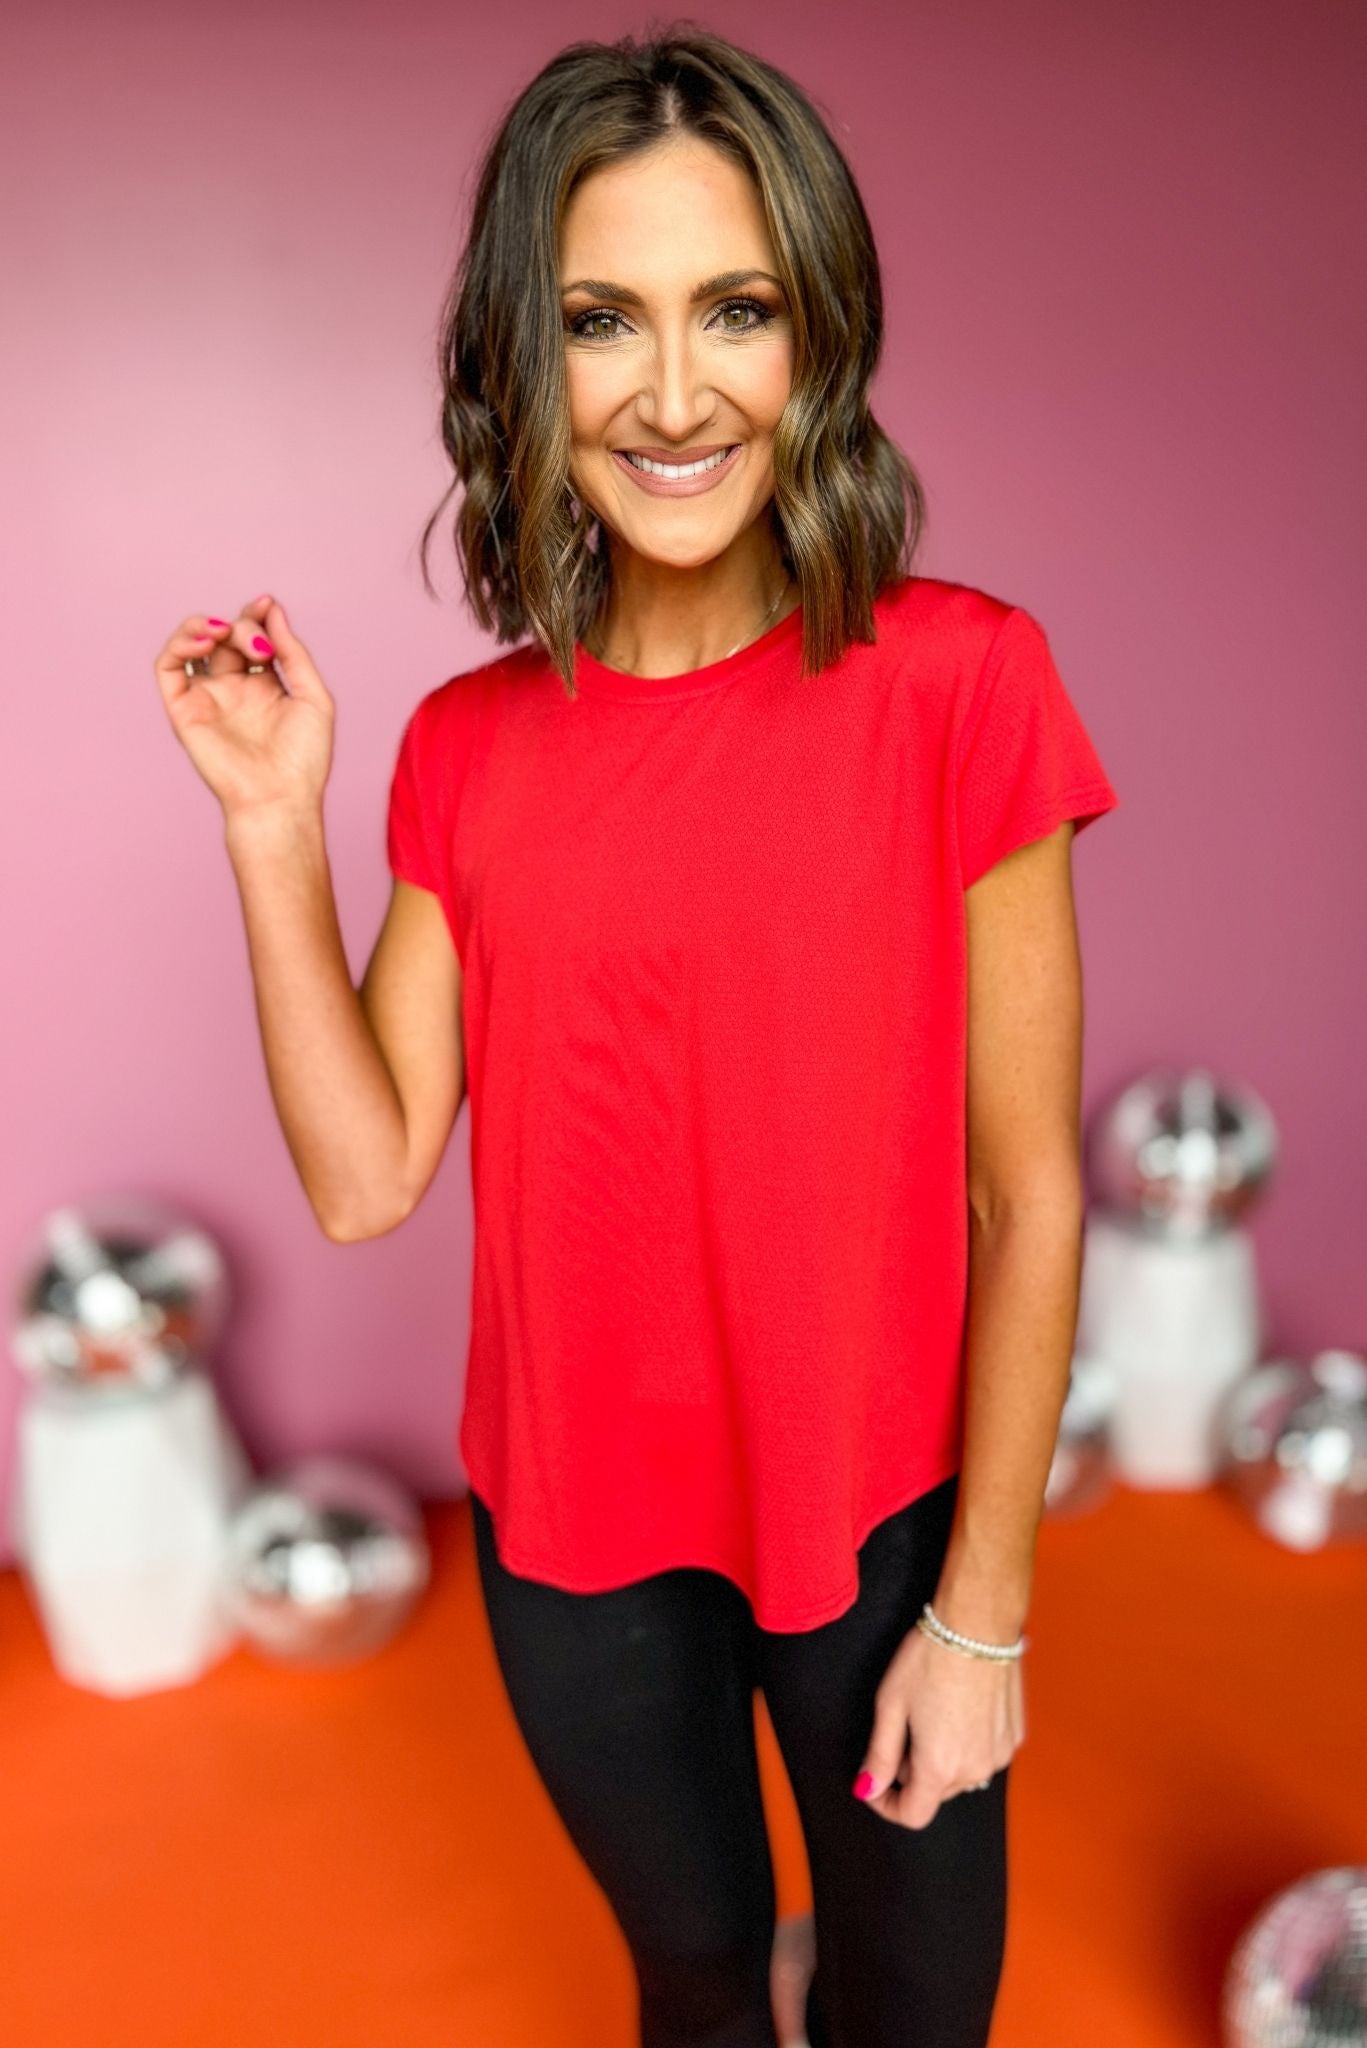 SSYS Red Honeycomb Short Sleeve Active Top,  ssys the label, athleisure, elevated athleisure, must have top, athletic top, bright top, athletic style, mom style, shop style your senses by mallory fitzsimmons, ssys by mallory fitzsimmons